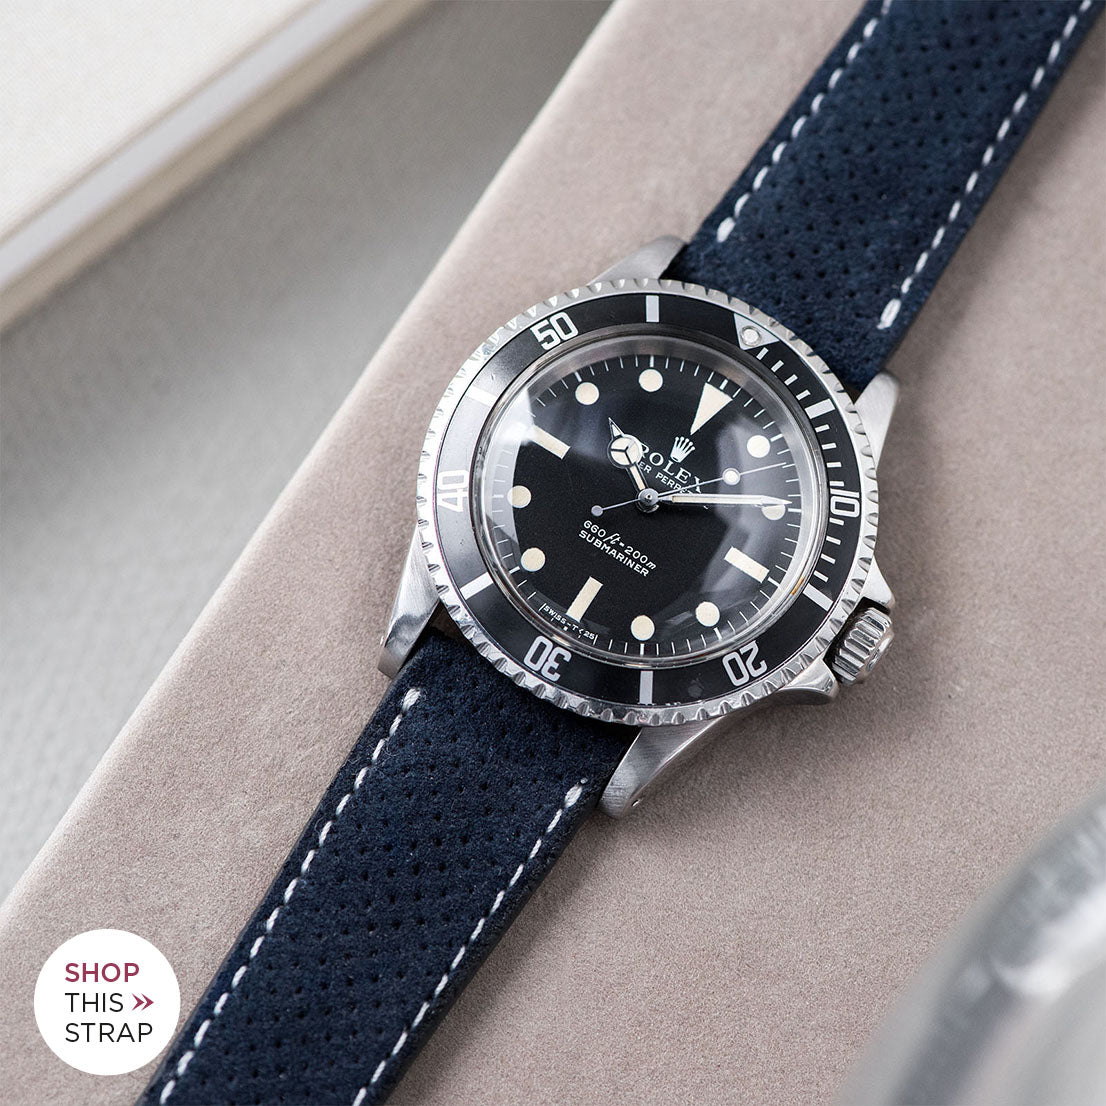 Bulang and Sons_Strap Guide_The Rolex 5513 Black Submariner_Punched Blue Silky Suede Leather Watch Strap